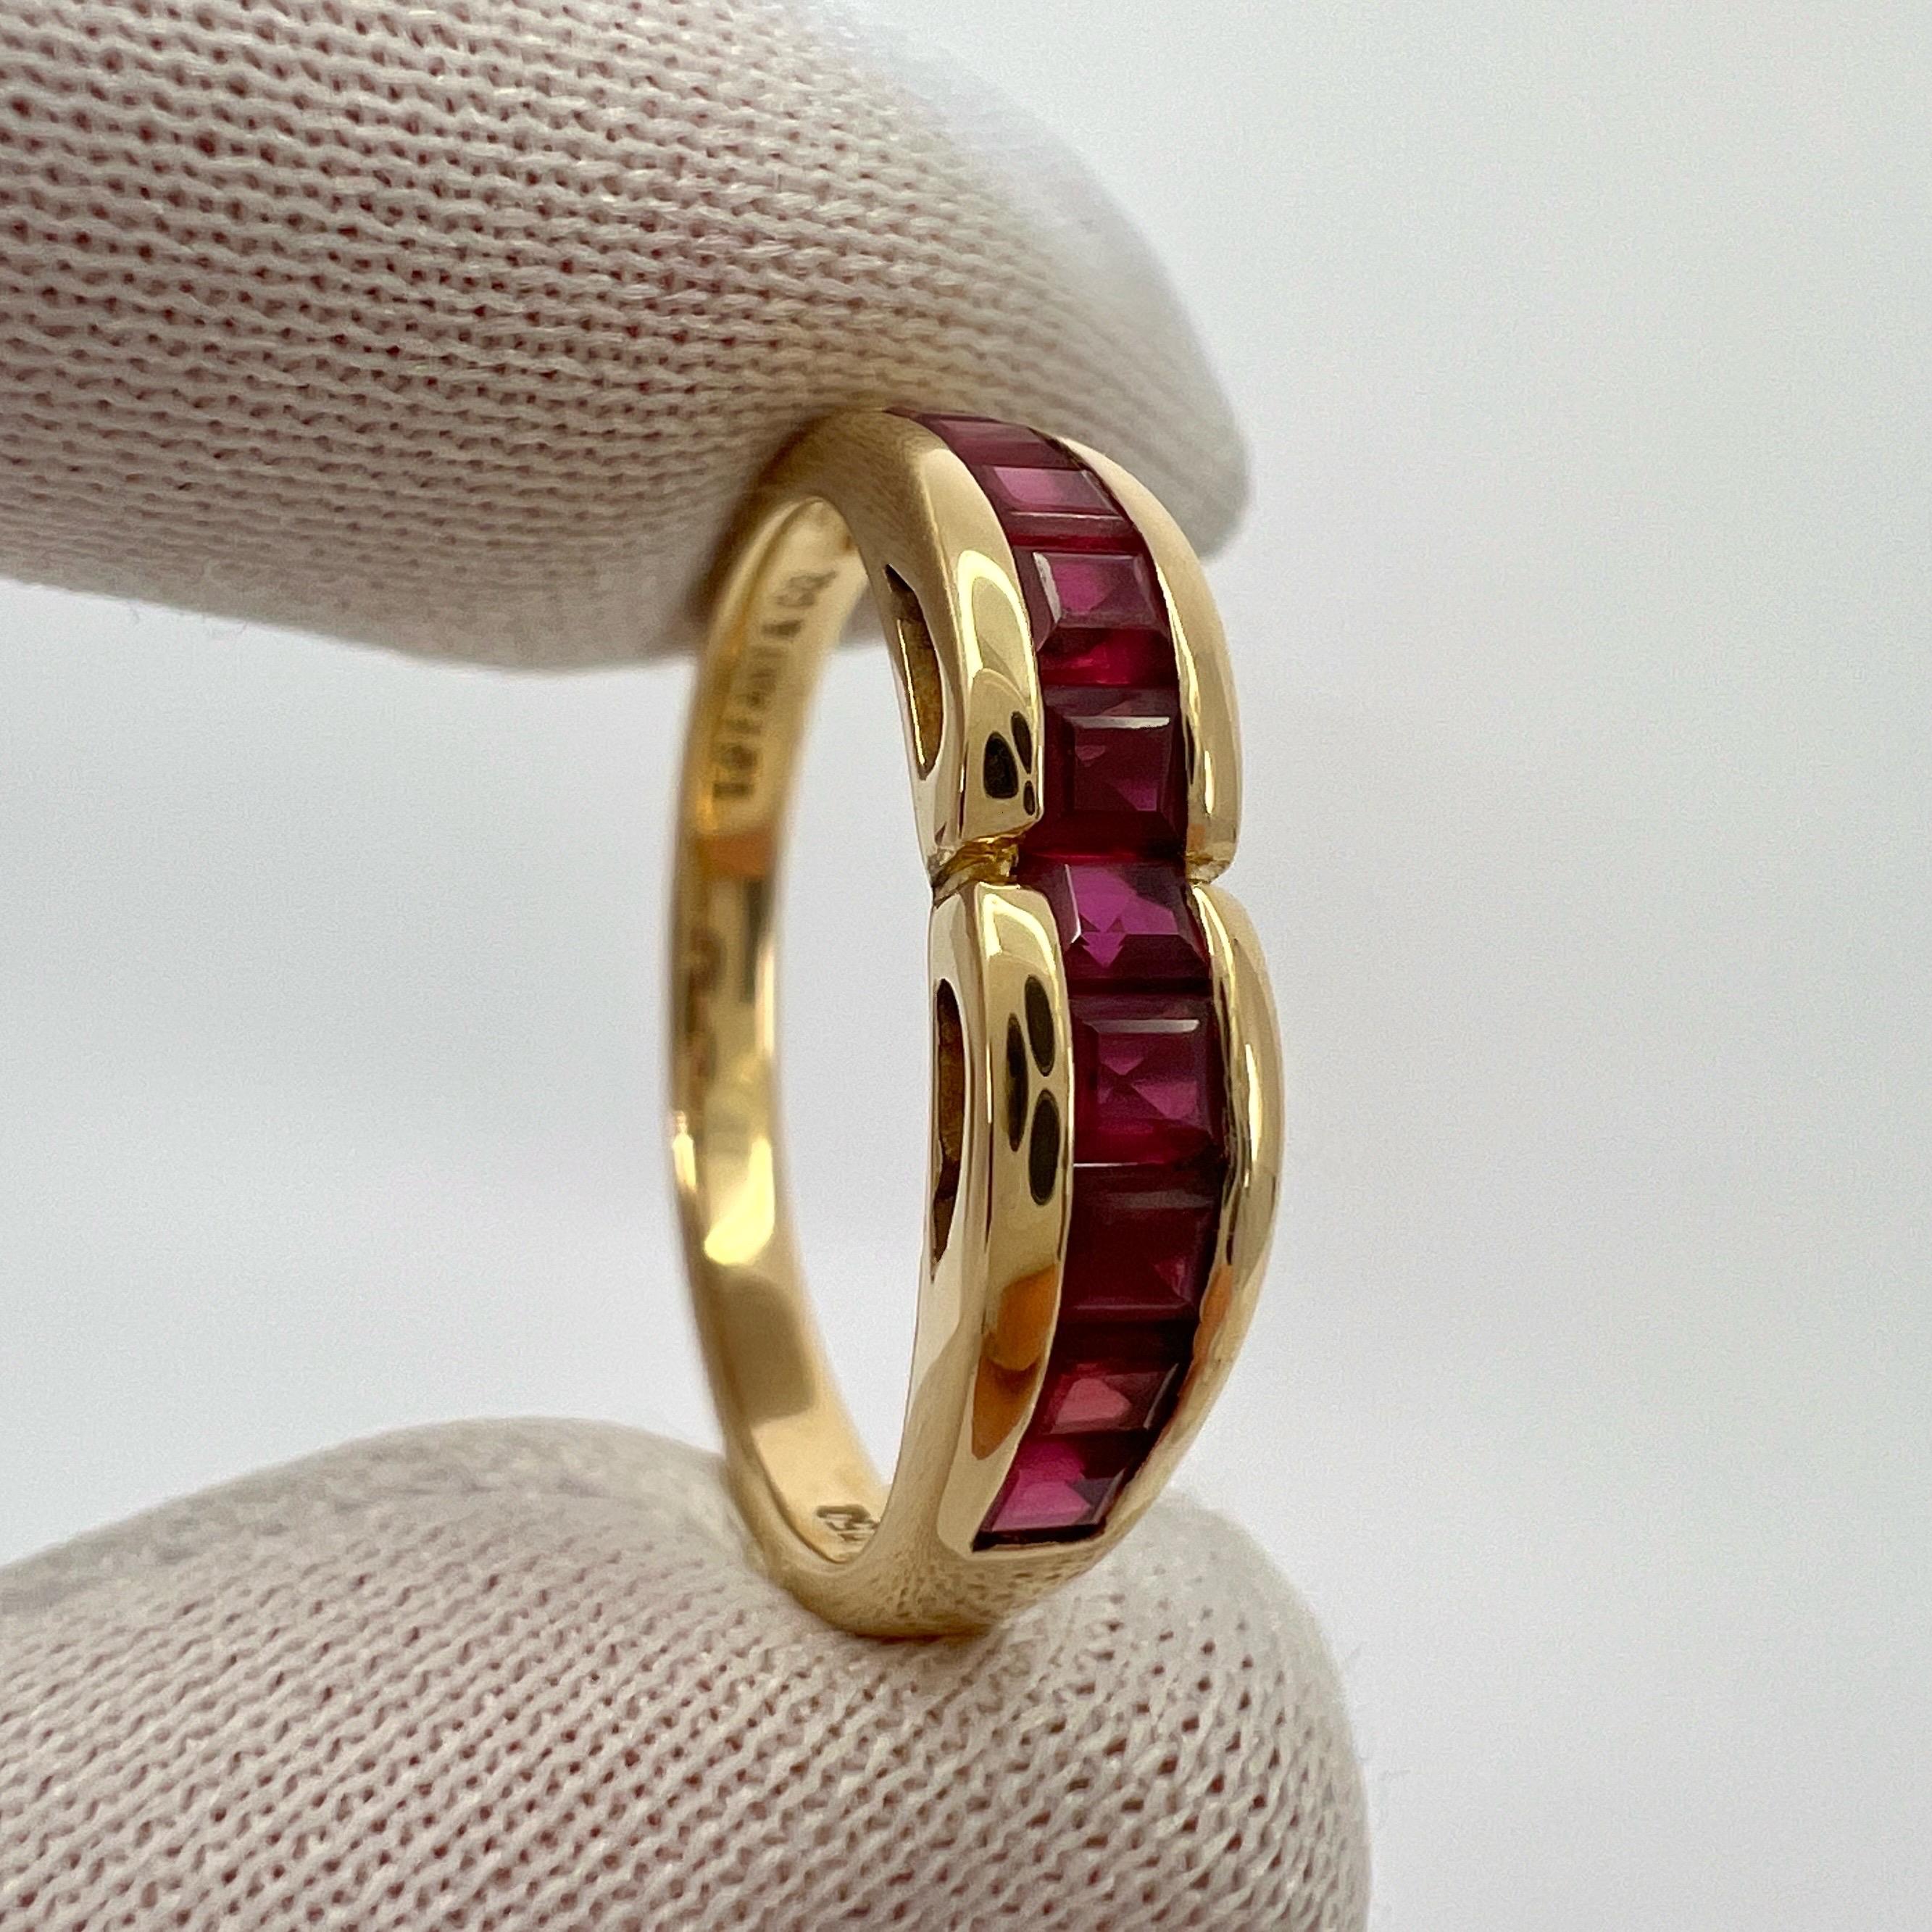 Tiffany & Co. Red Ruby Square Princess Cut 18k Yellow Gold Eternity Band Ring 5